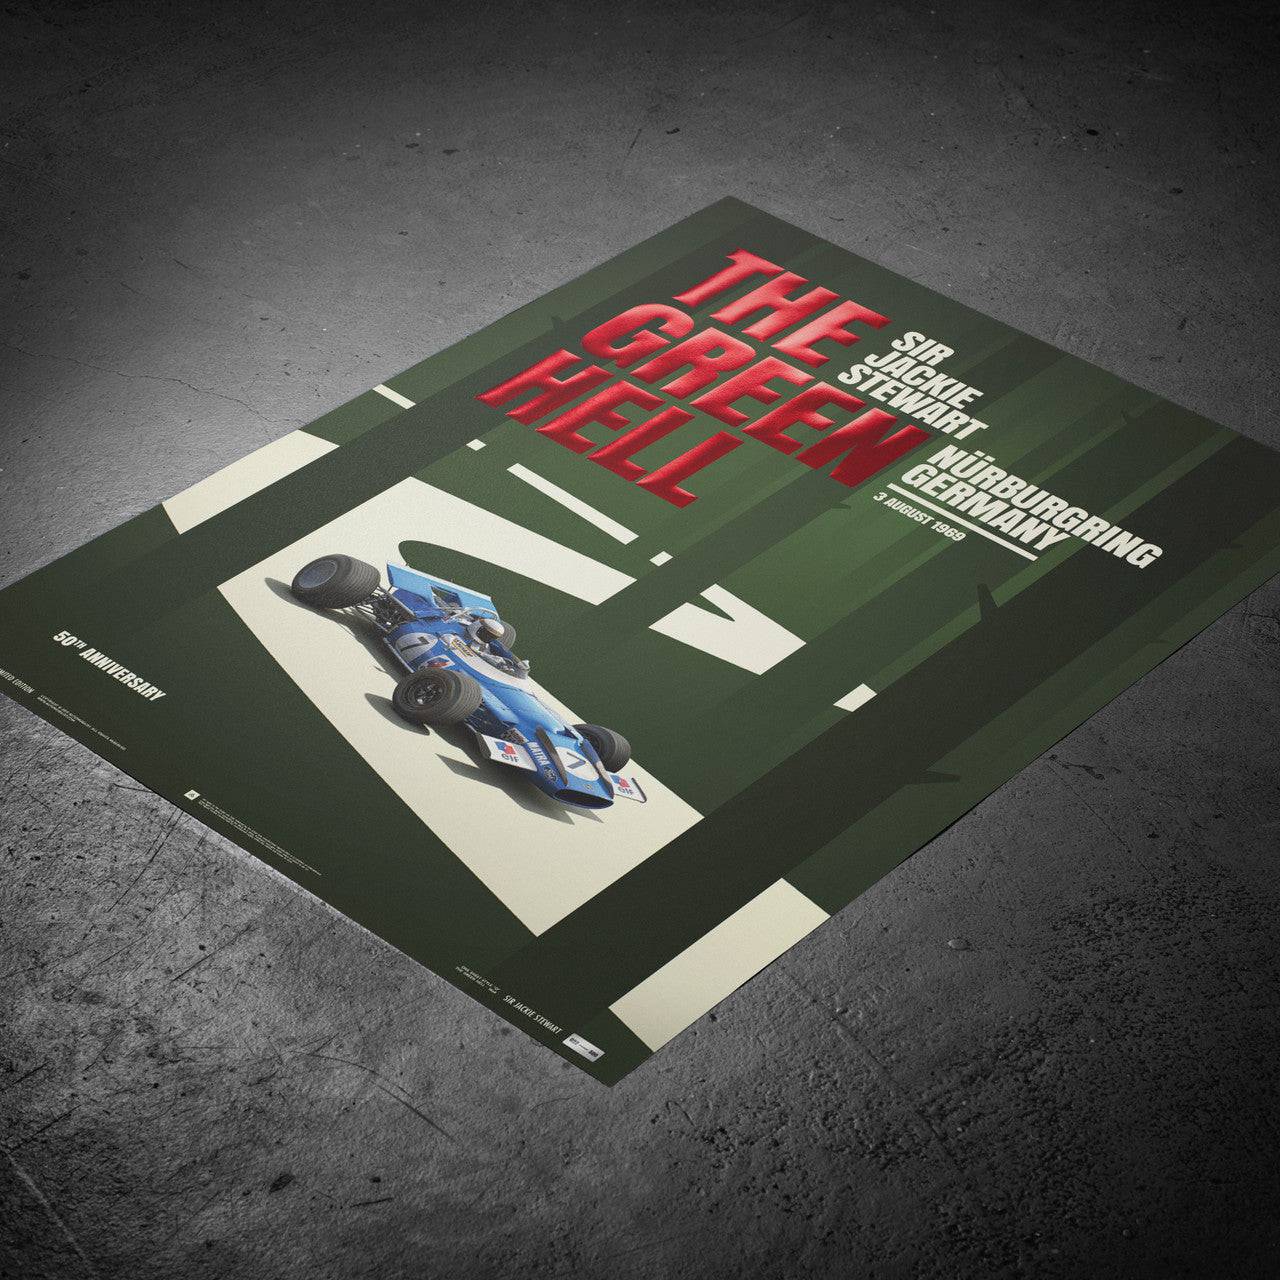 Matra MS80 - Sir  Jackie Stewart - The Green Hell - Nürburgring GP - 1969 | Collector's Edition Poster